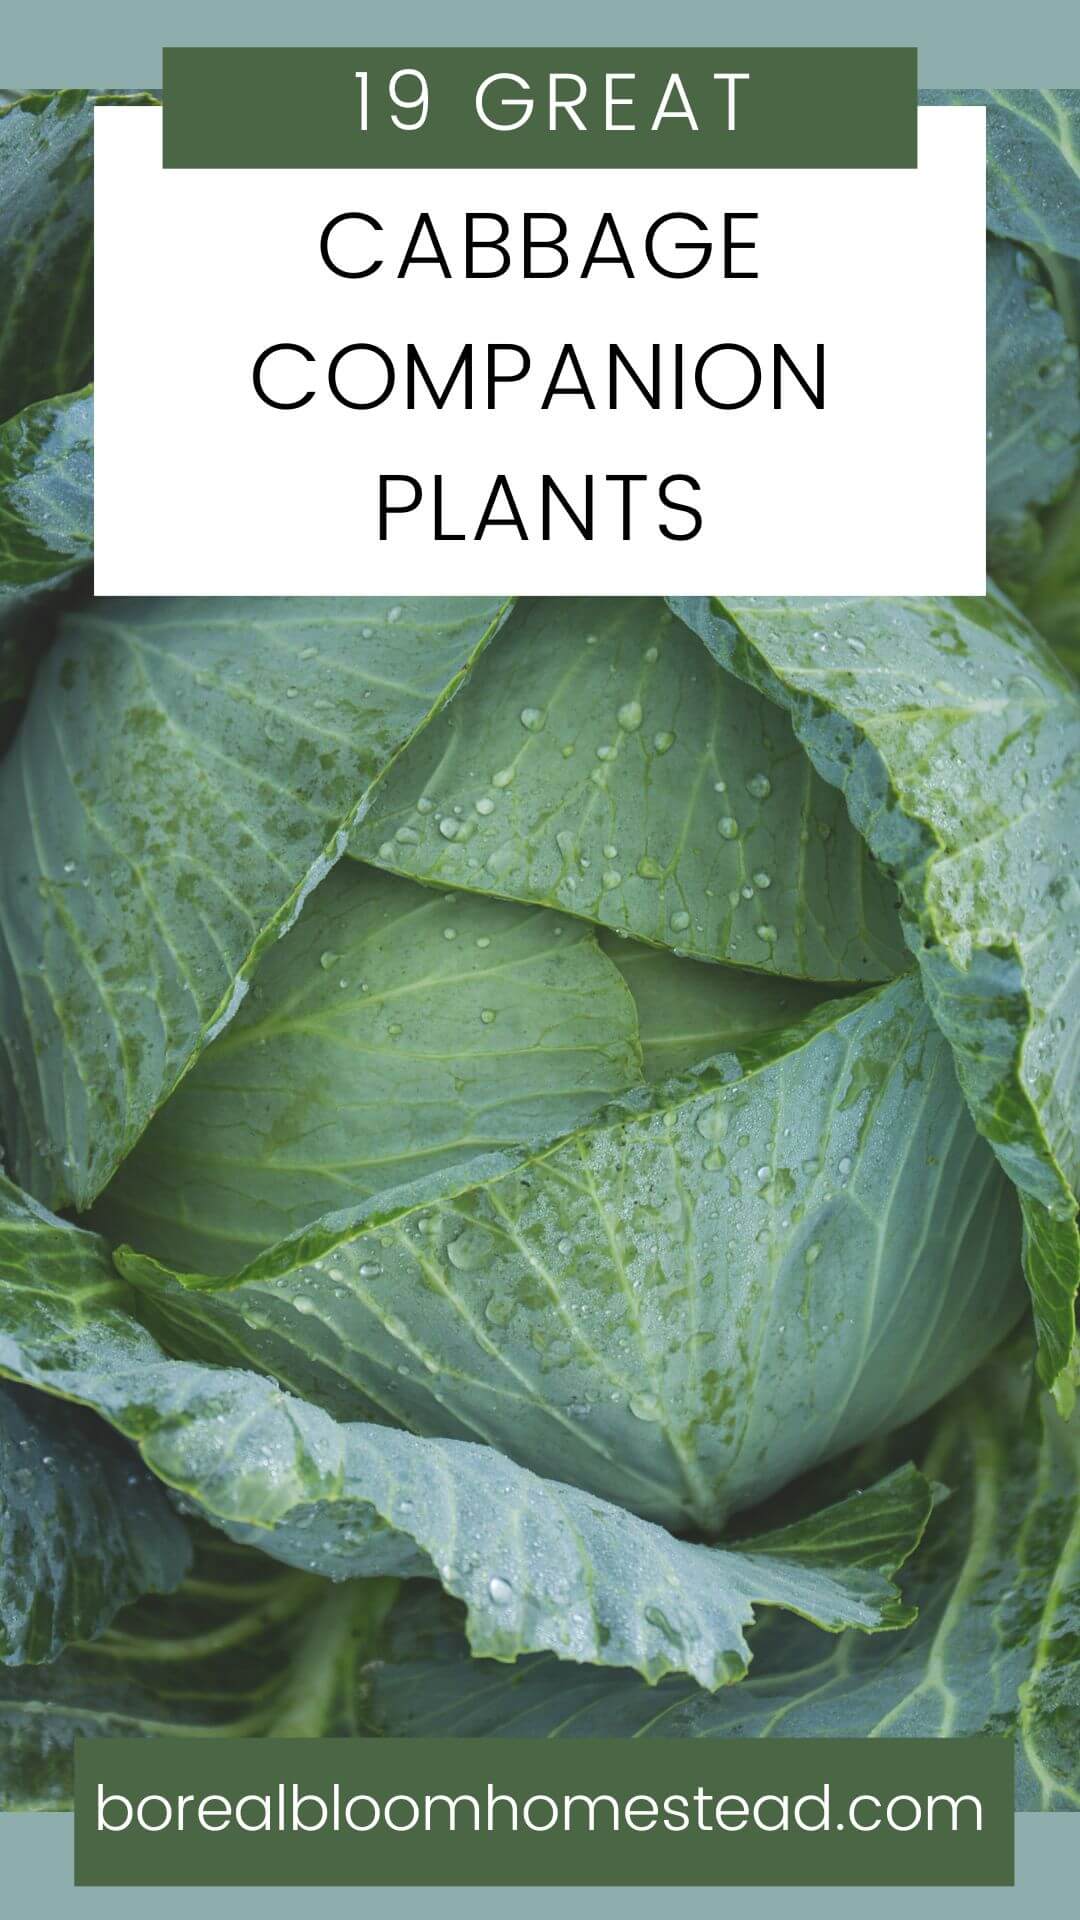 Cabbage plant with text overlay: 15 great cabbage companion plants. 